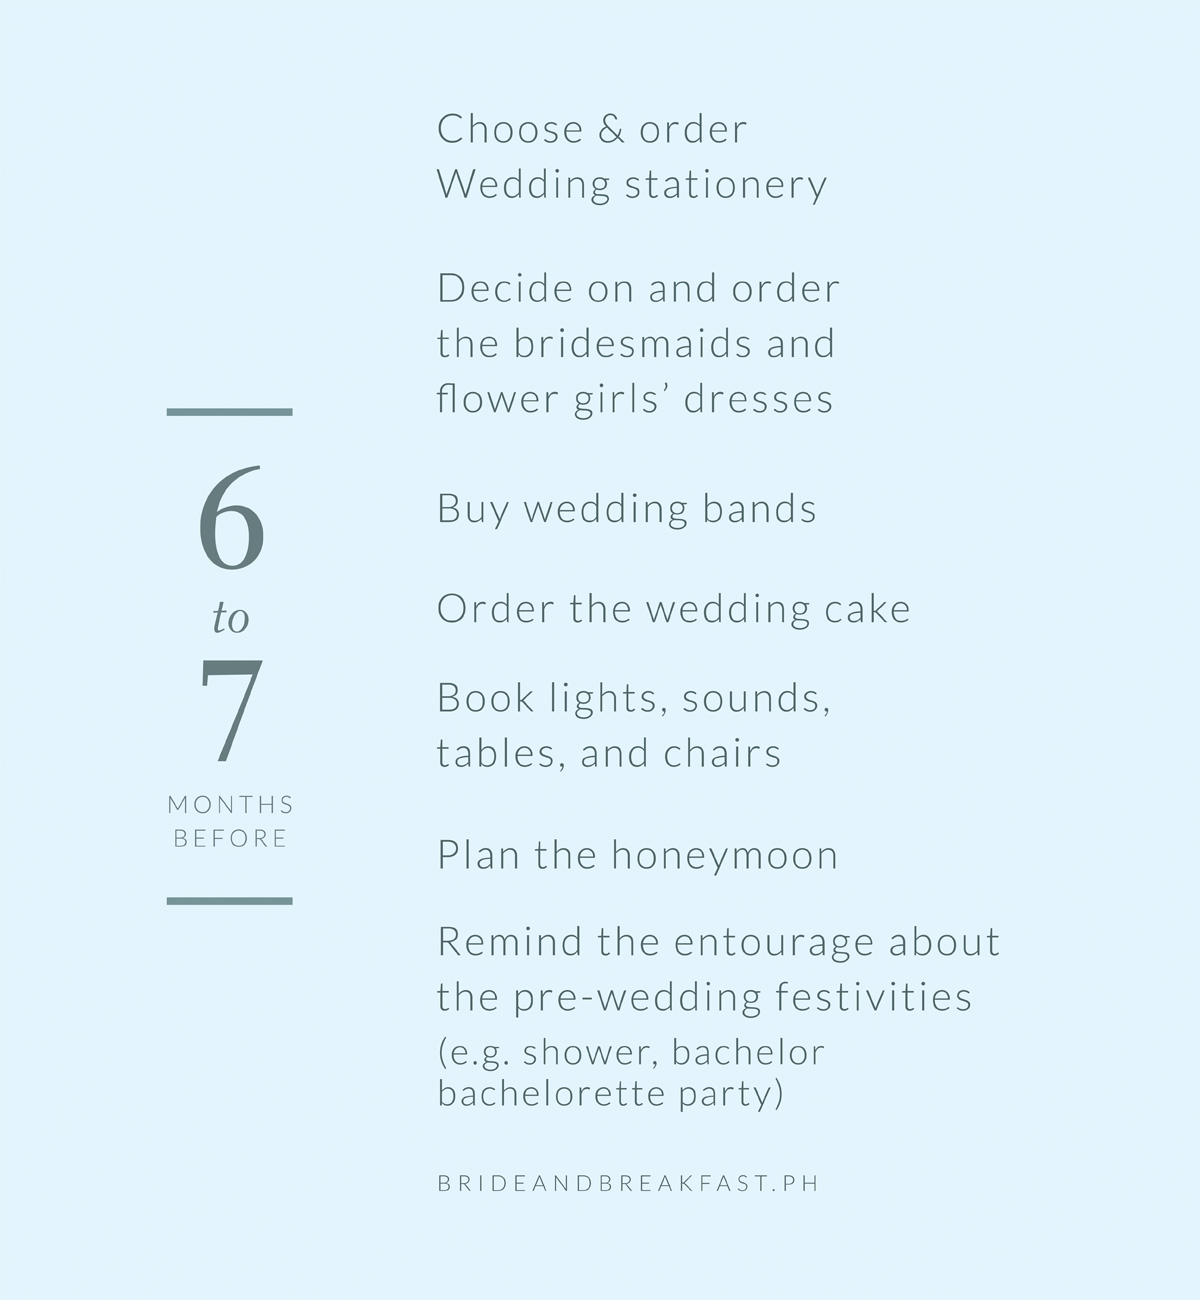 6-7 months before Choose and order wedding stationery Decide on and order the bridesmaids and flower girls’ dresses Buy wedding bands Order the wedding cake Book lights, sounds, tables, and chairs Plan the honeymoon Remind the entourage about the pre-wedding festivities (e.g. shower, bachelor/bachelorett party)